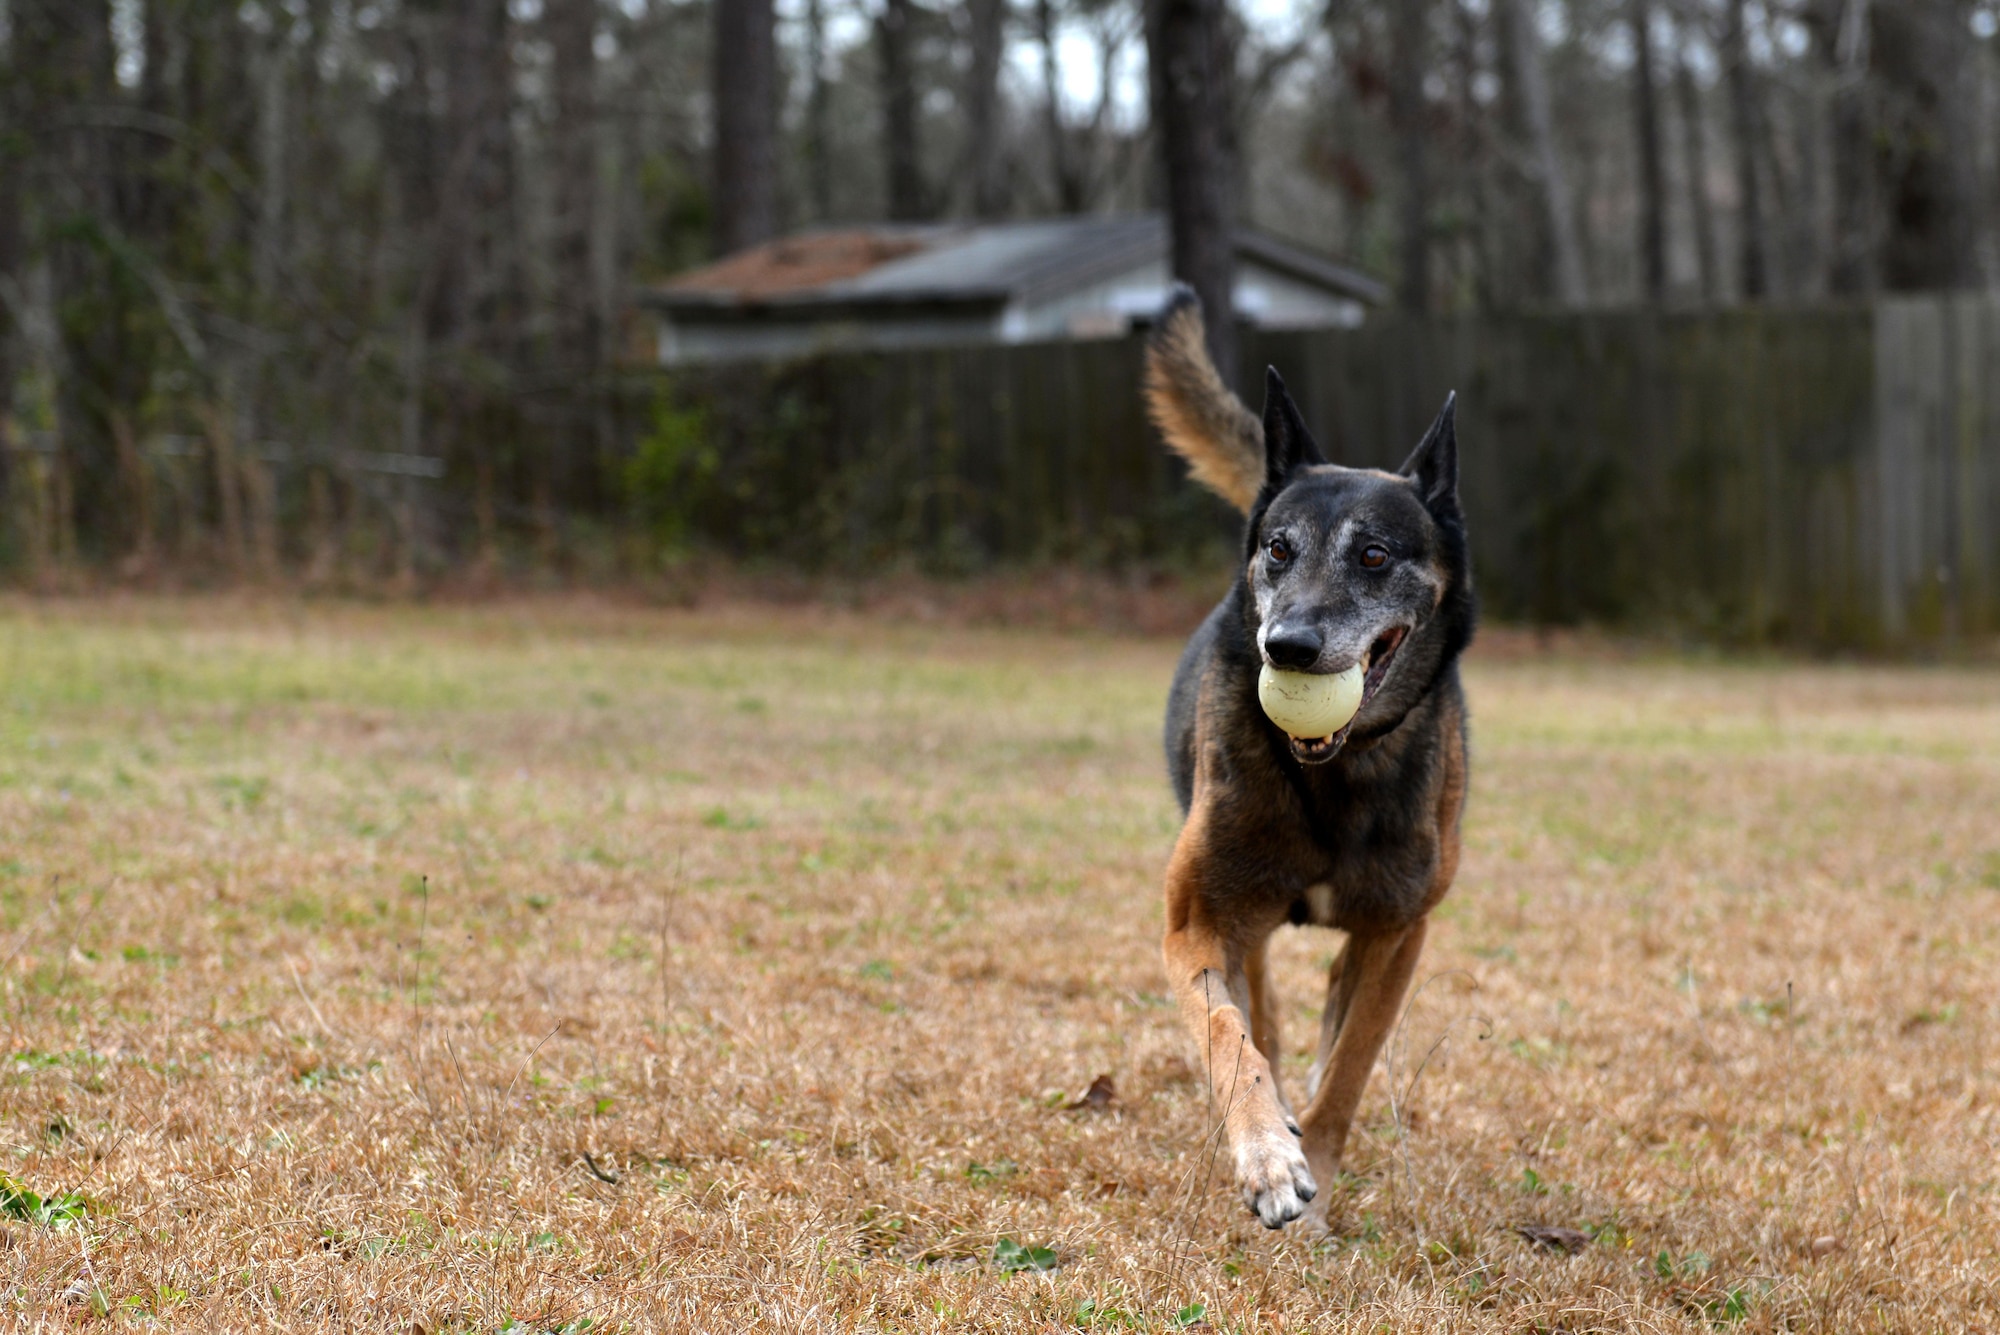 Jony, a retired military working dog, plays outside his new home in Sumter, S.C., March 22, 2017. After a nine-year career as an explosives-certified patrol dog, Jony’s first handler adopted him. (U.S. Air Force photo by Airman 1st Class Destinee Sweeney)